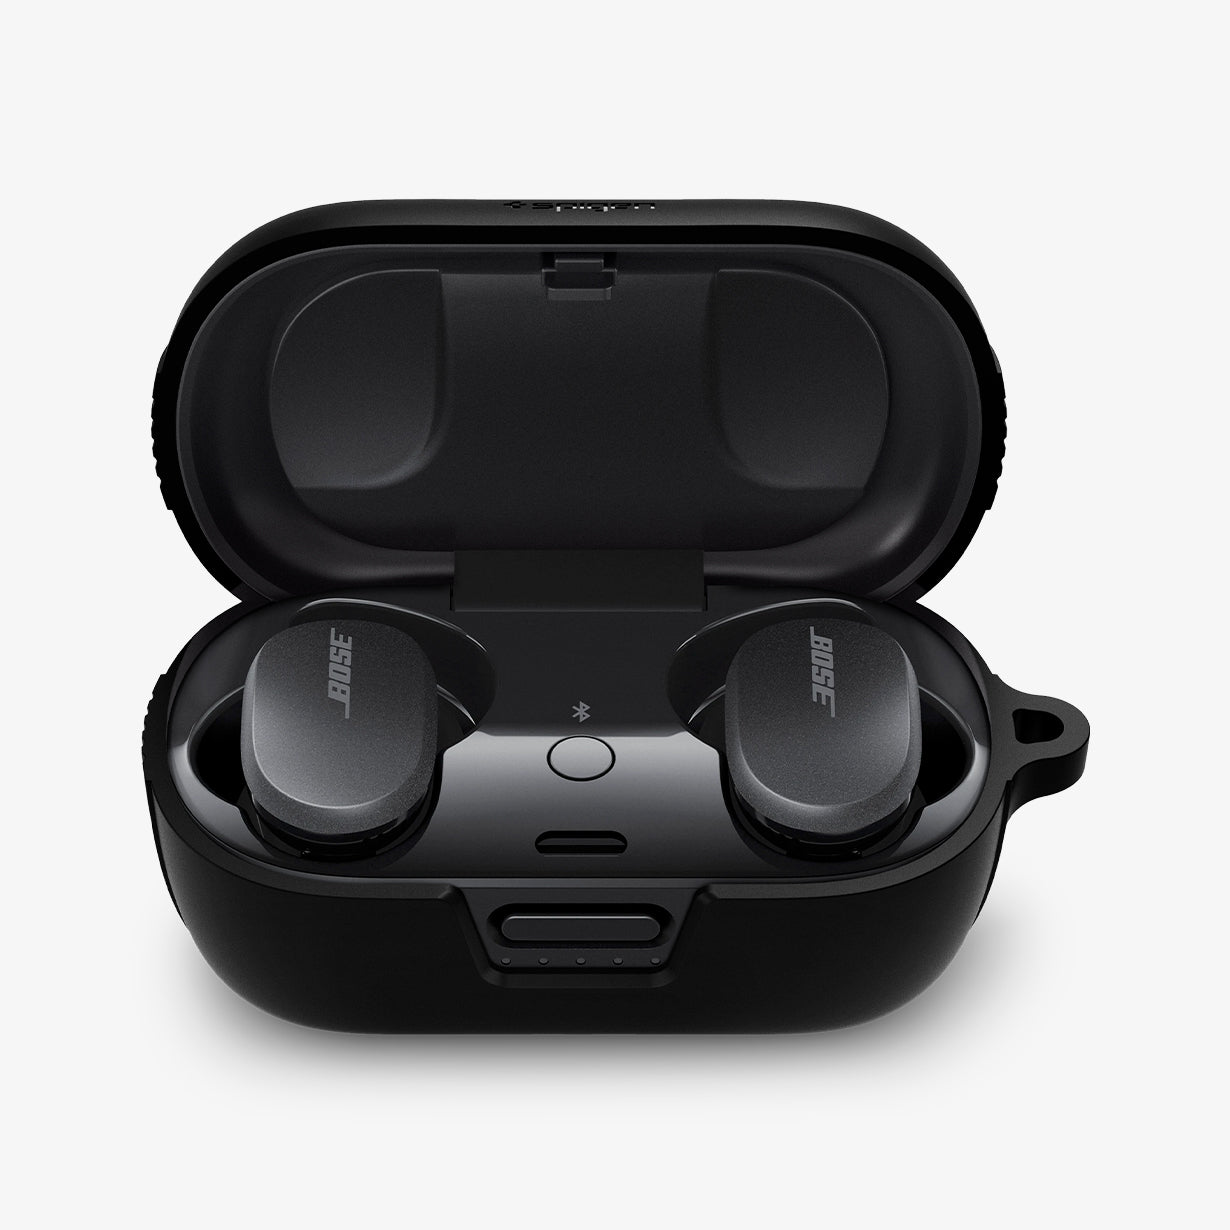 ASD02487 - Bose Earbuds Quiet Comfort Case Rugged Armor in black showing the front with top open and earbuds inside